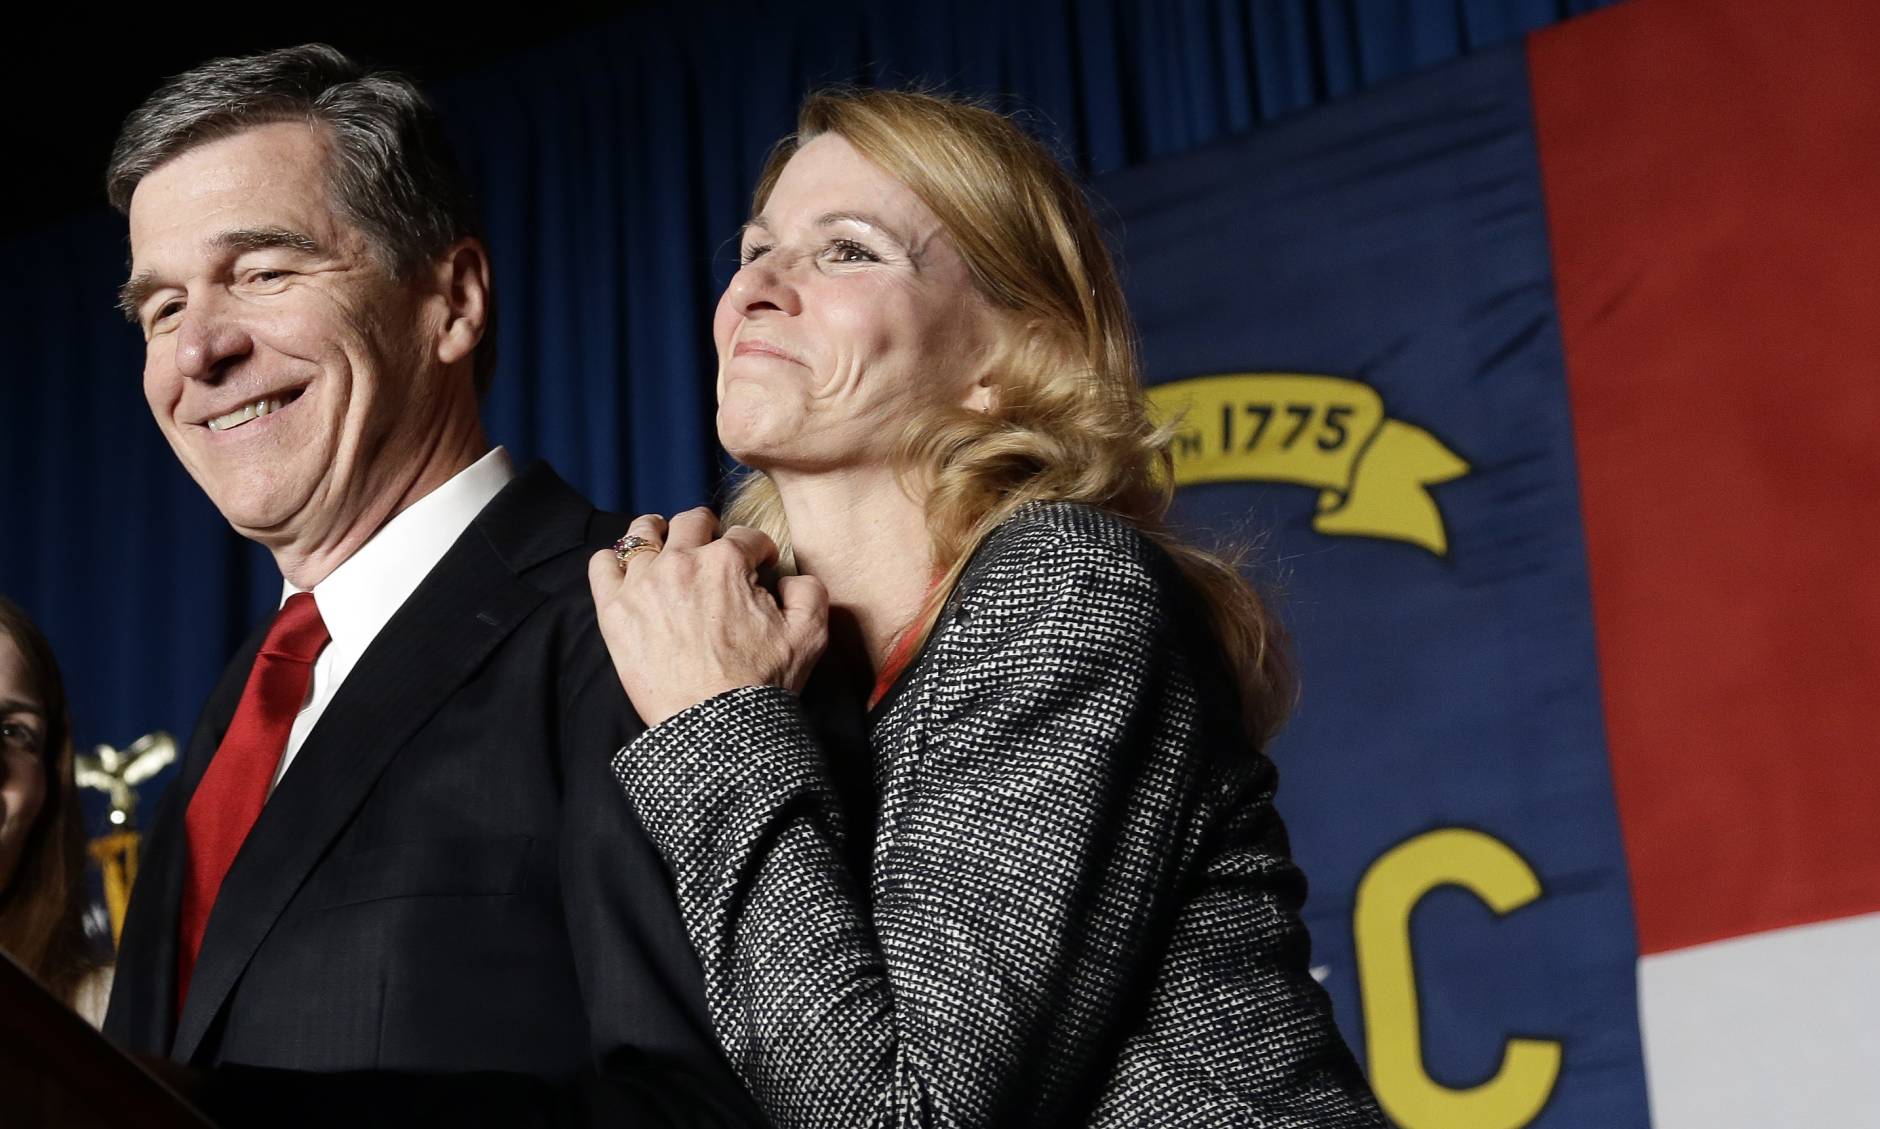 North Carolina Democratic candidate for governor Roy Cooper and his wife Kristin greet supporters during an election night rally in Raleigh, N.C., Wednesday, Nov. 9, 2016. The race between Cooper and Republican Gov. Pat McCrory remains too close to call. (AP Photo/Gerry Broome)